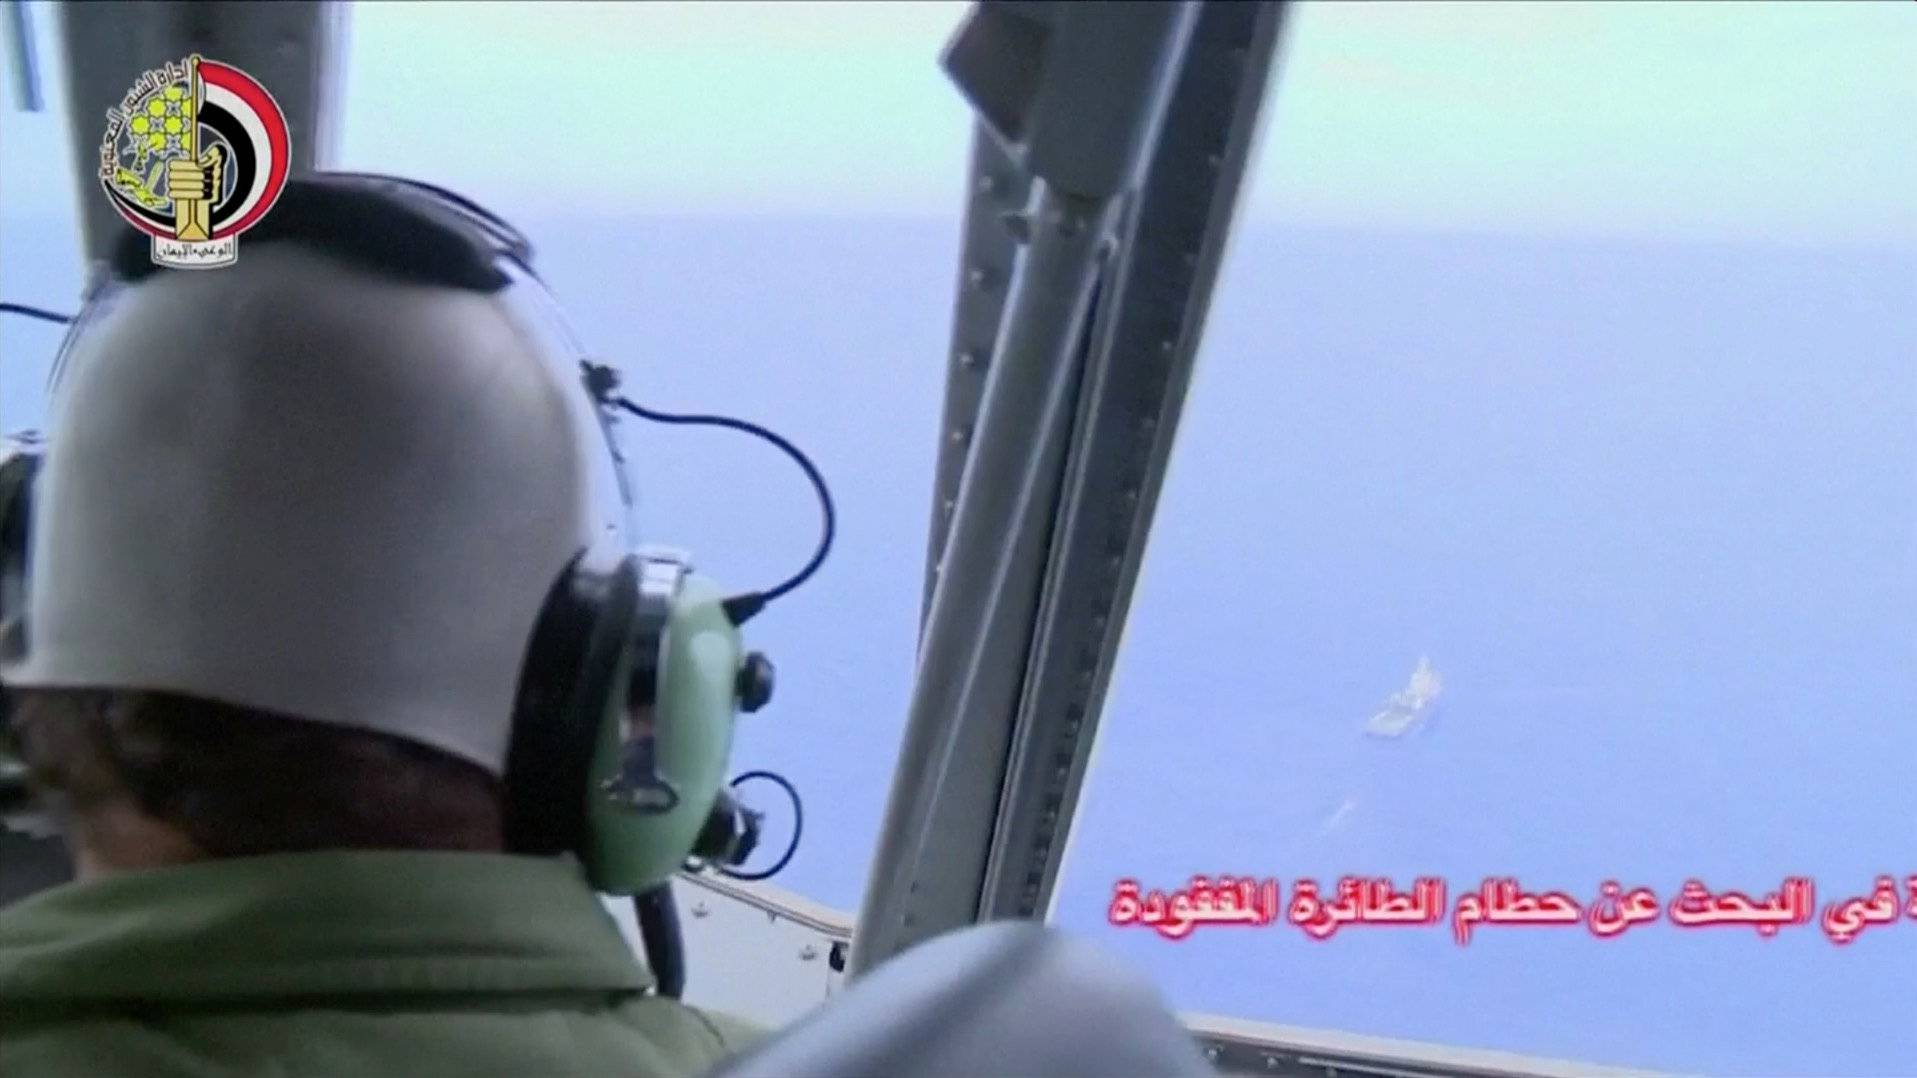 A pilot looks out of the cockpit during a search operation by Egyptian air and navy forces for the EgyptAir plane that disappeared in the Mediterranean Sea, in this still image taken from video